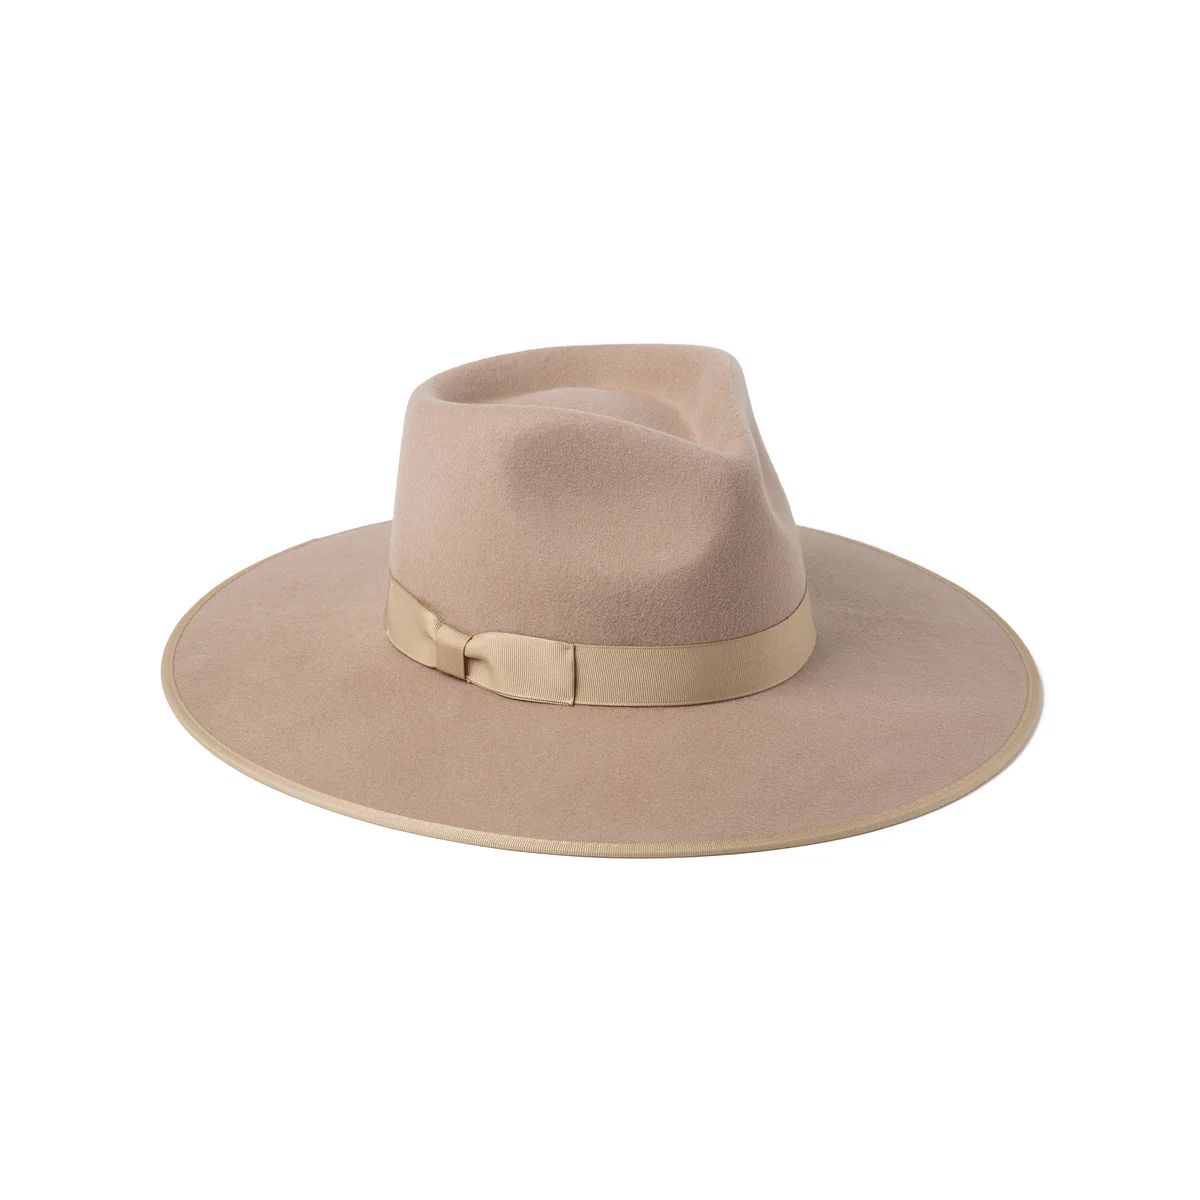 Zulu Rancher - Wool Felt Rancher Hat in White | Lack of Color US | Lack of Color